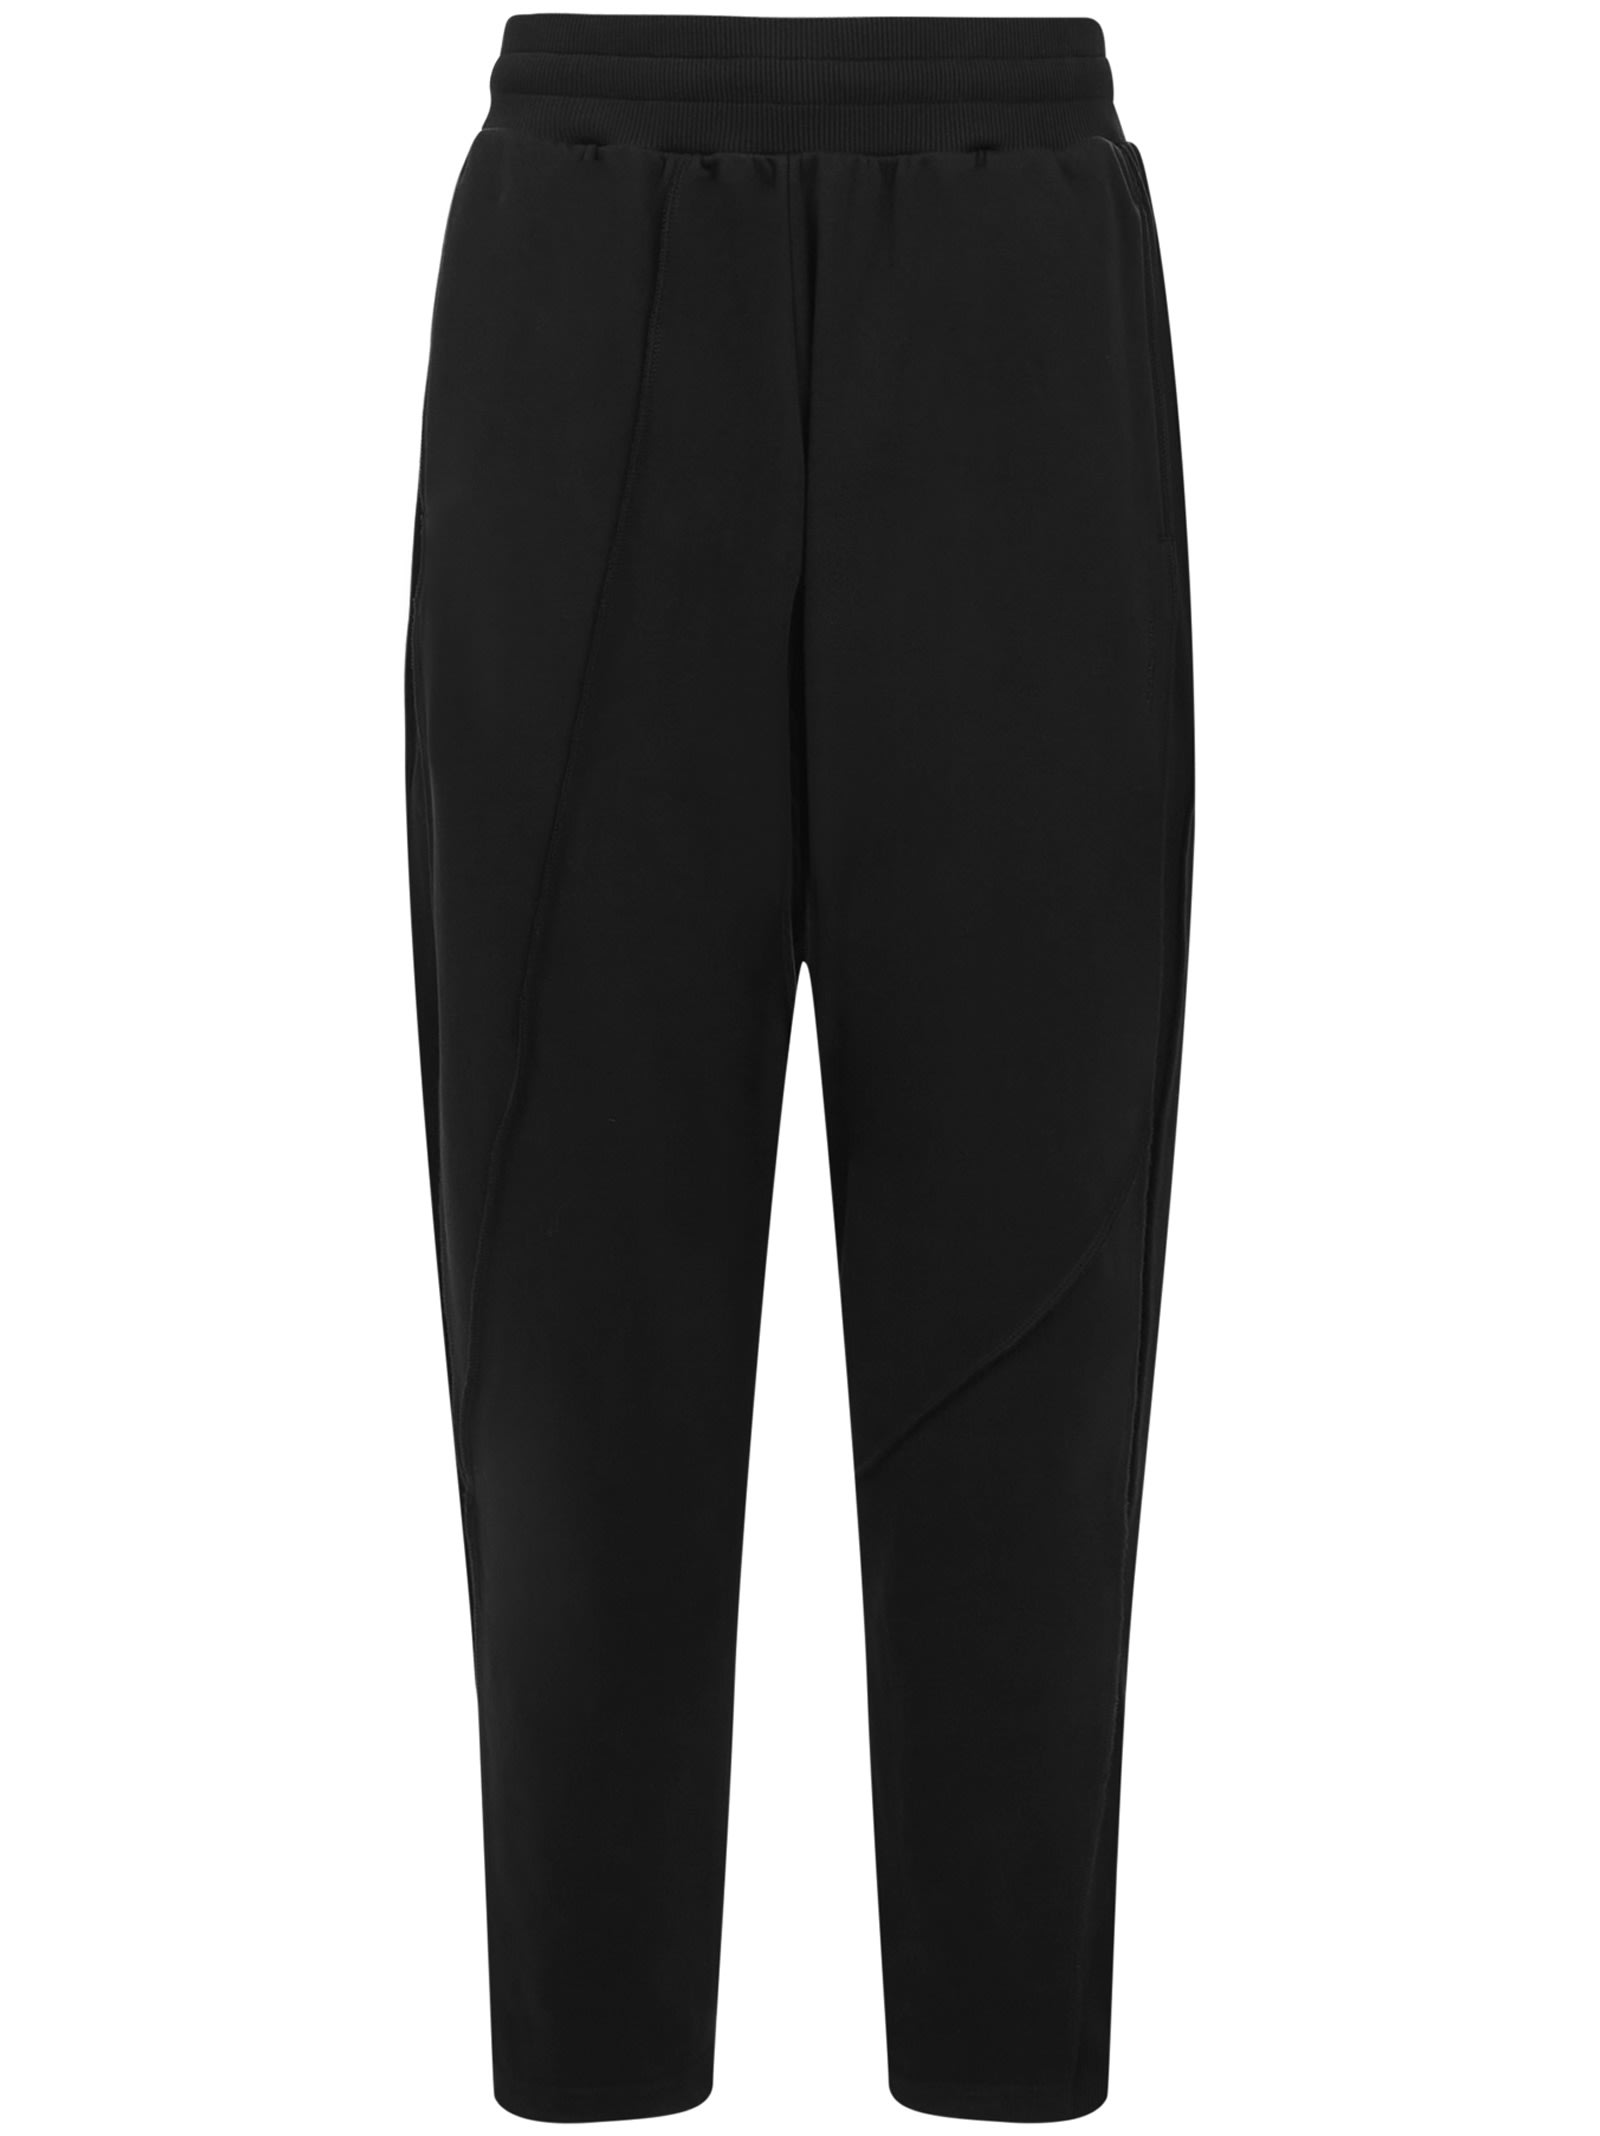 A-COLD-WALL A Cold Wall Dissection Trousers